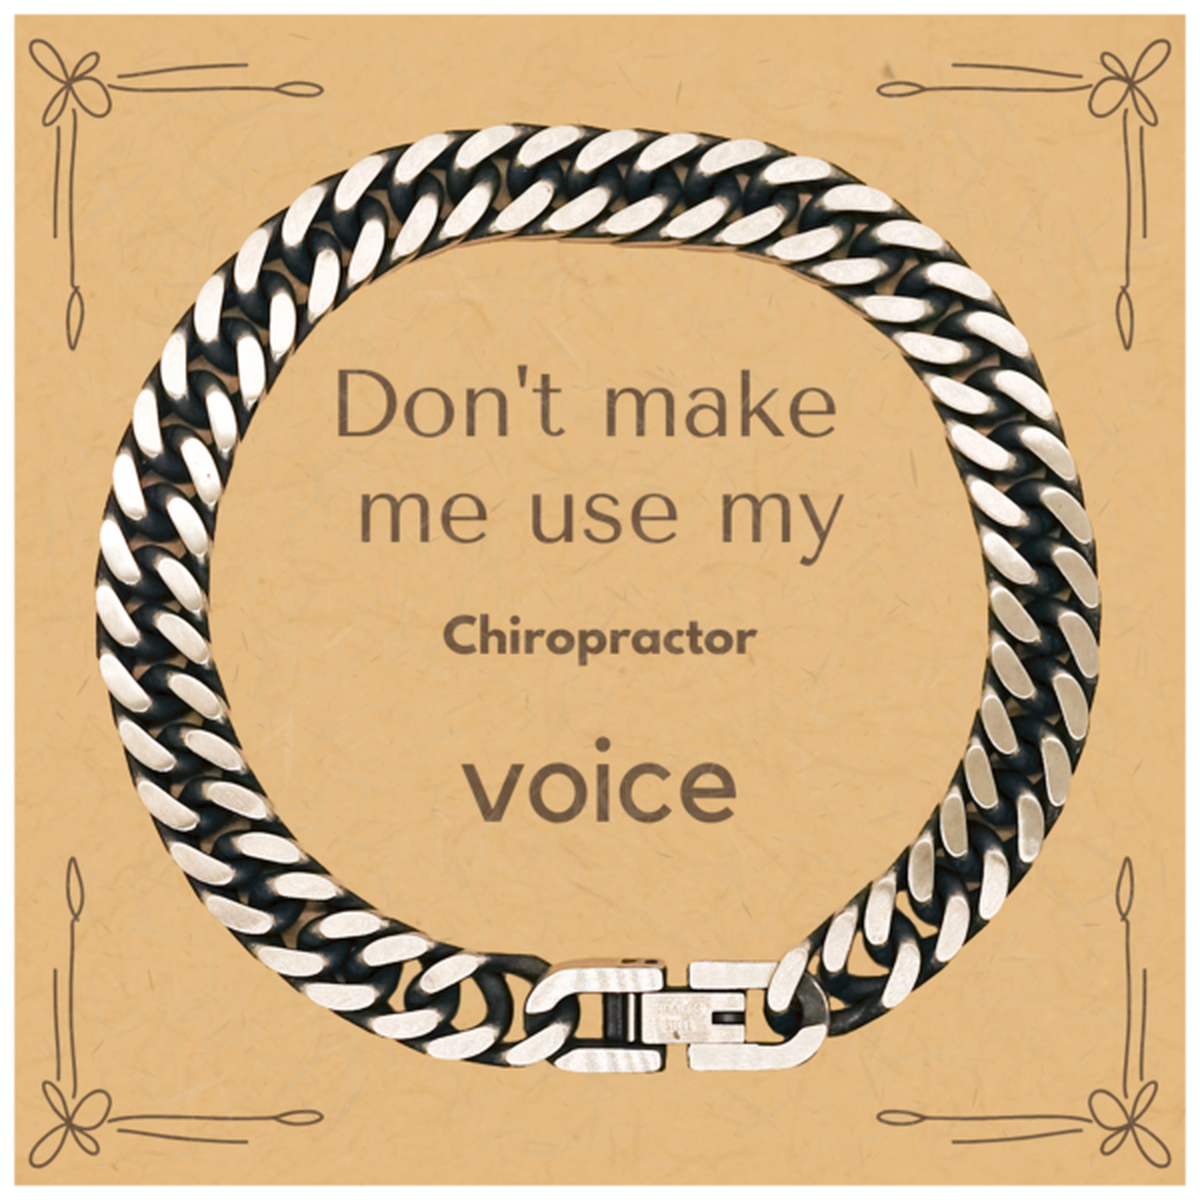 Don't make me use my Chiropractor voice, Sarcasm Chiropractor Card Gifts, Christmas Chiropractor Cuban Link Chain Bracelet Birthday Unique Gifts For Chiropractor Coworkers, Men, Women, Colleague, Friends